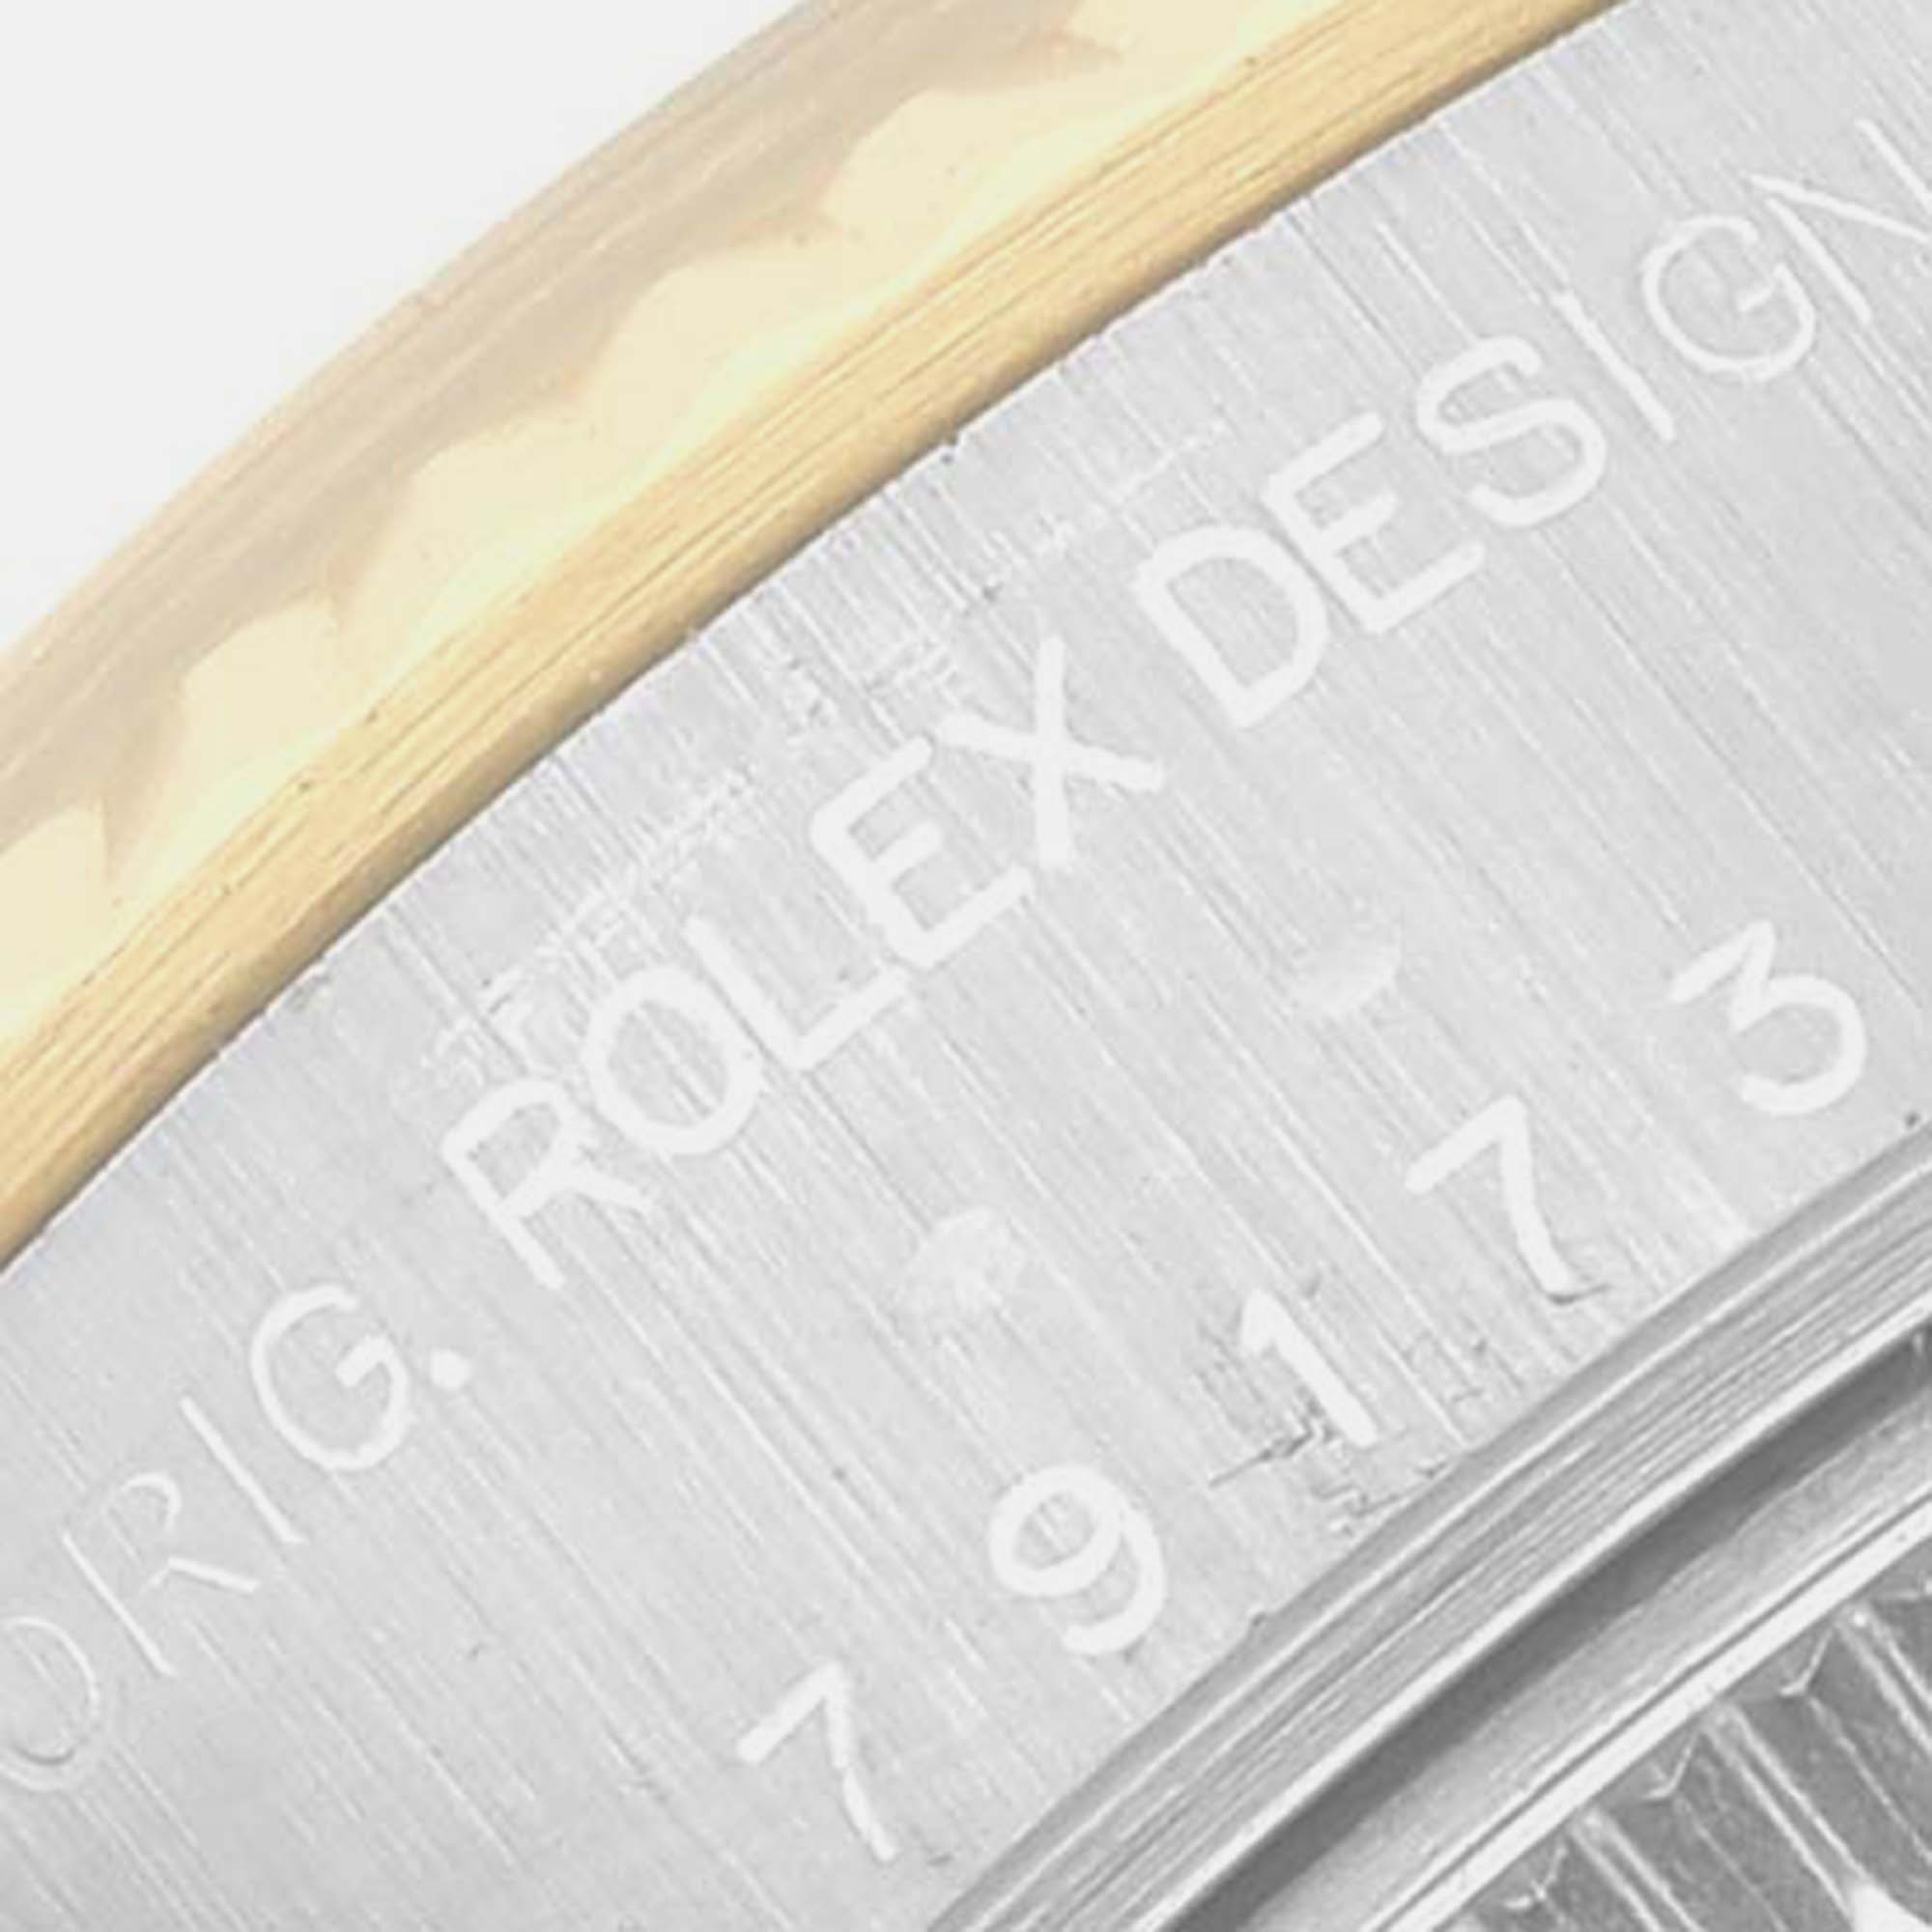 Rolex Datejust Steel Yellow Gold Ivory Anniversary Dial Ladies Watch 79173 26 Mm